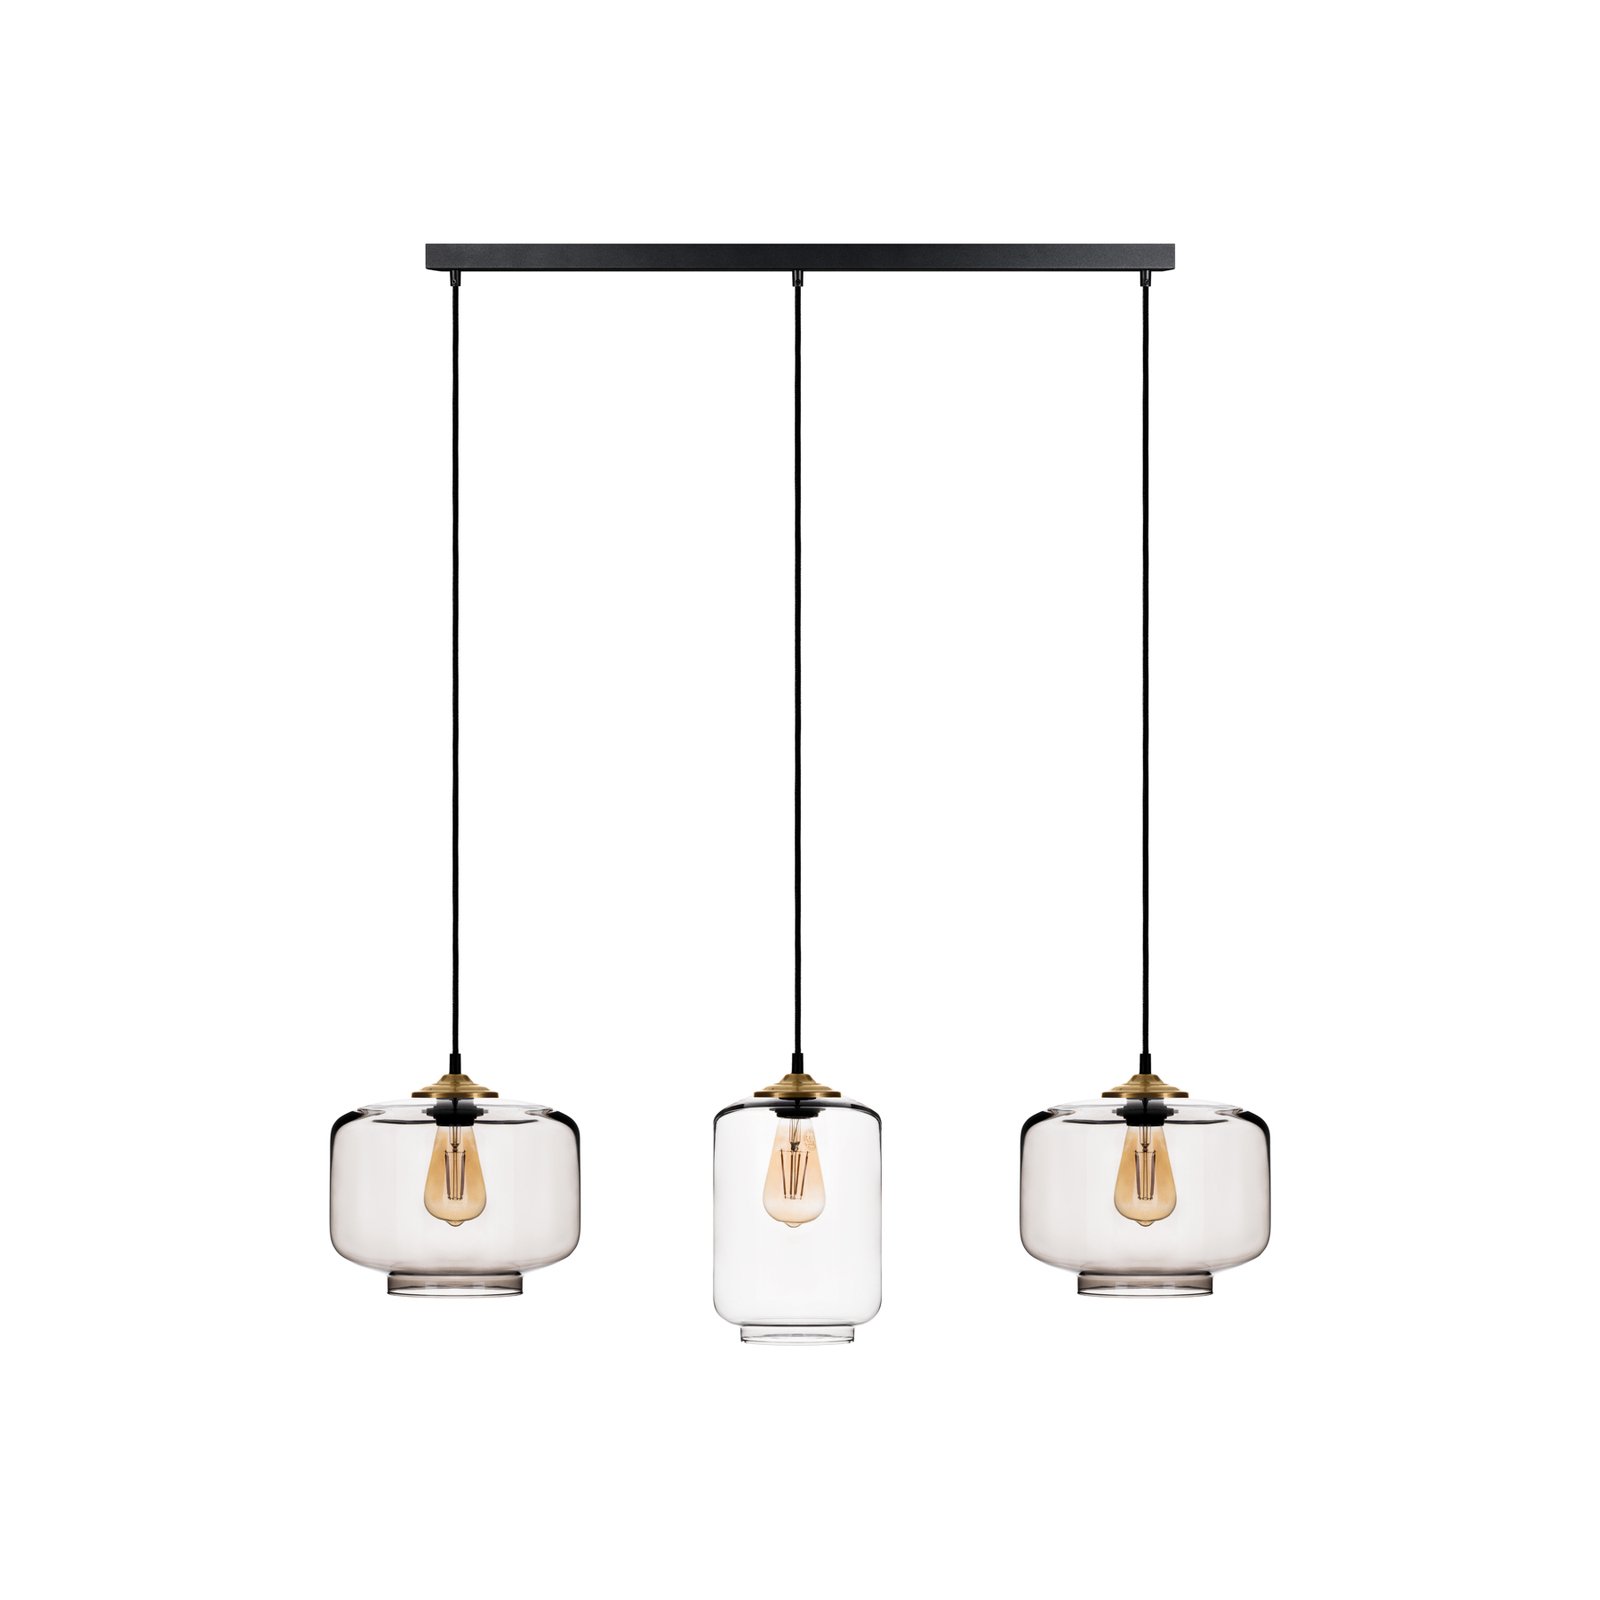 Hanglamp Tube 3-lamps kappen cilindrisch/rond rook